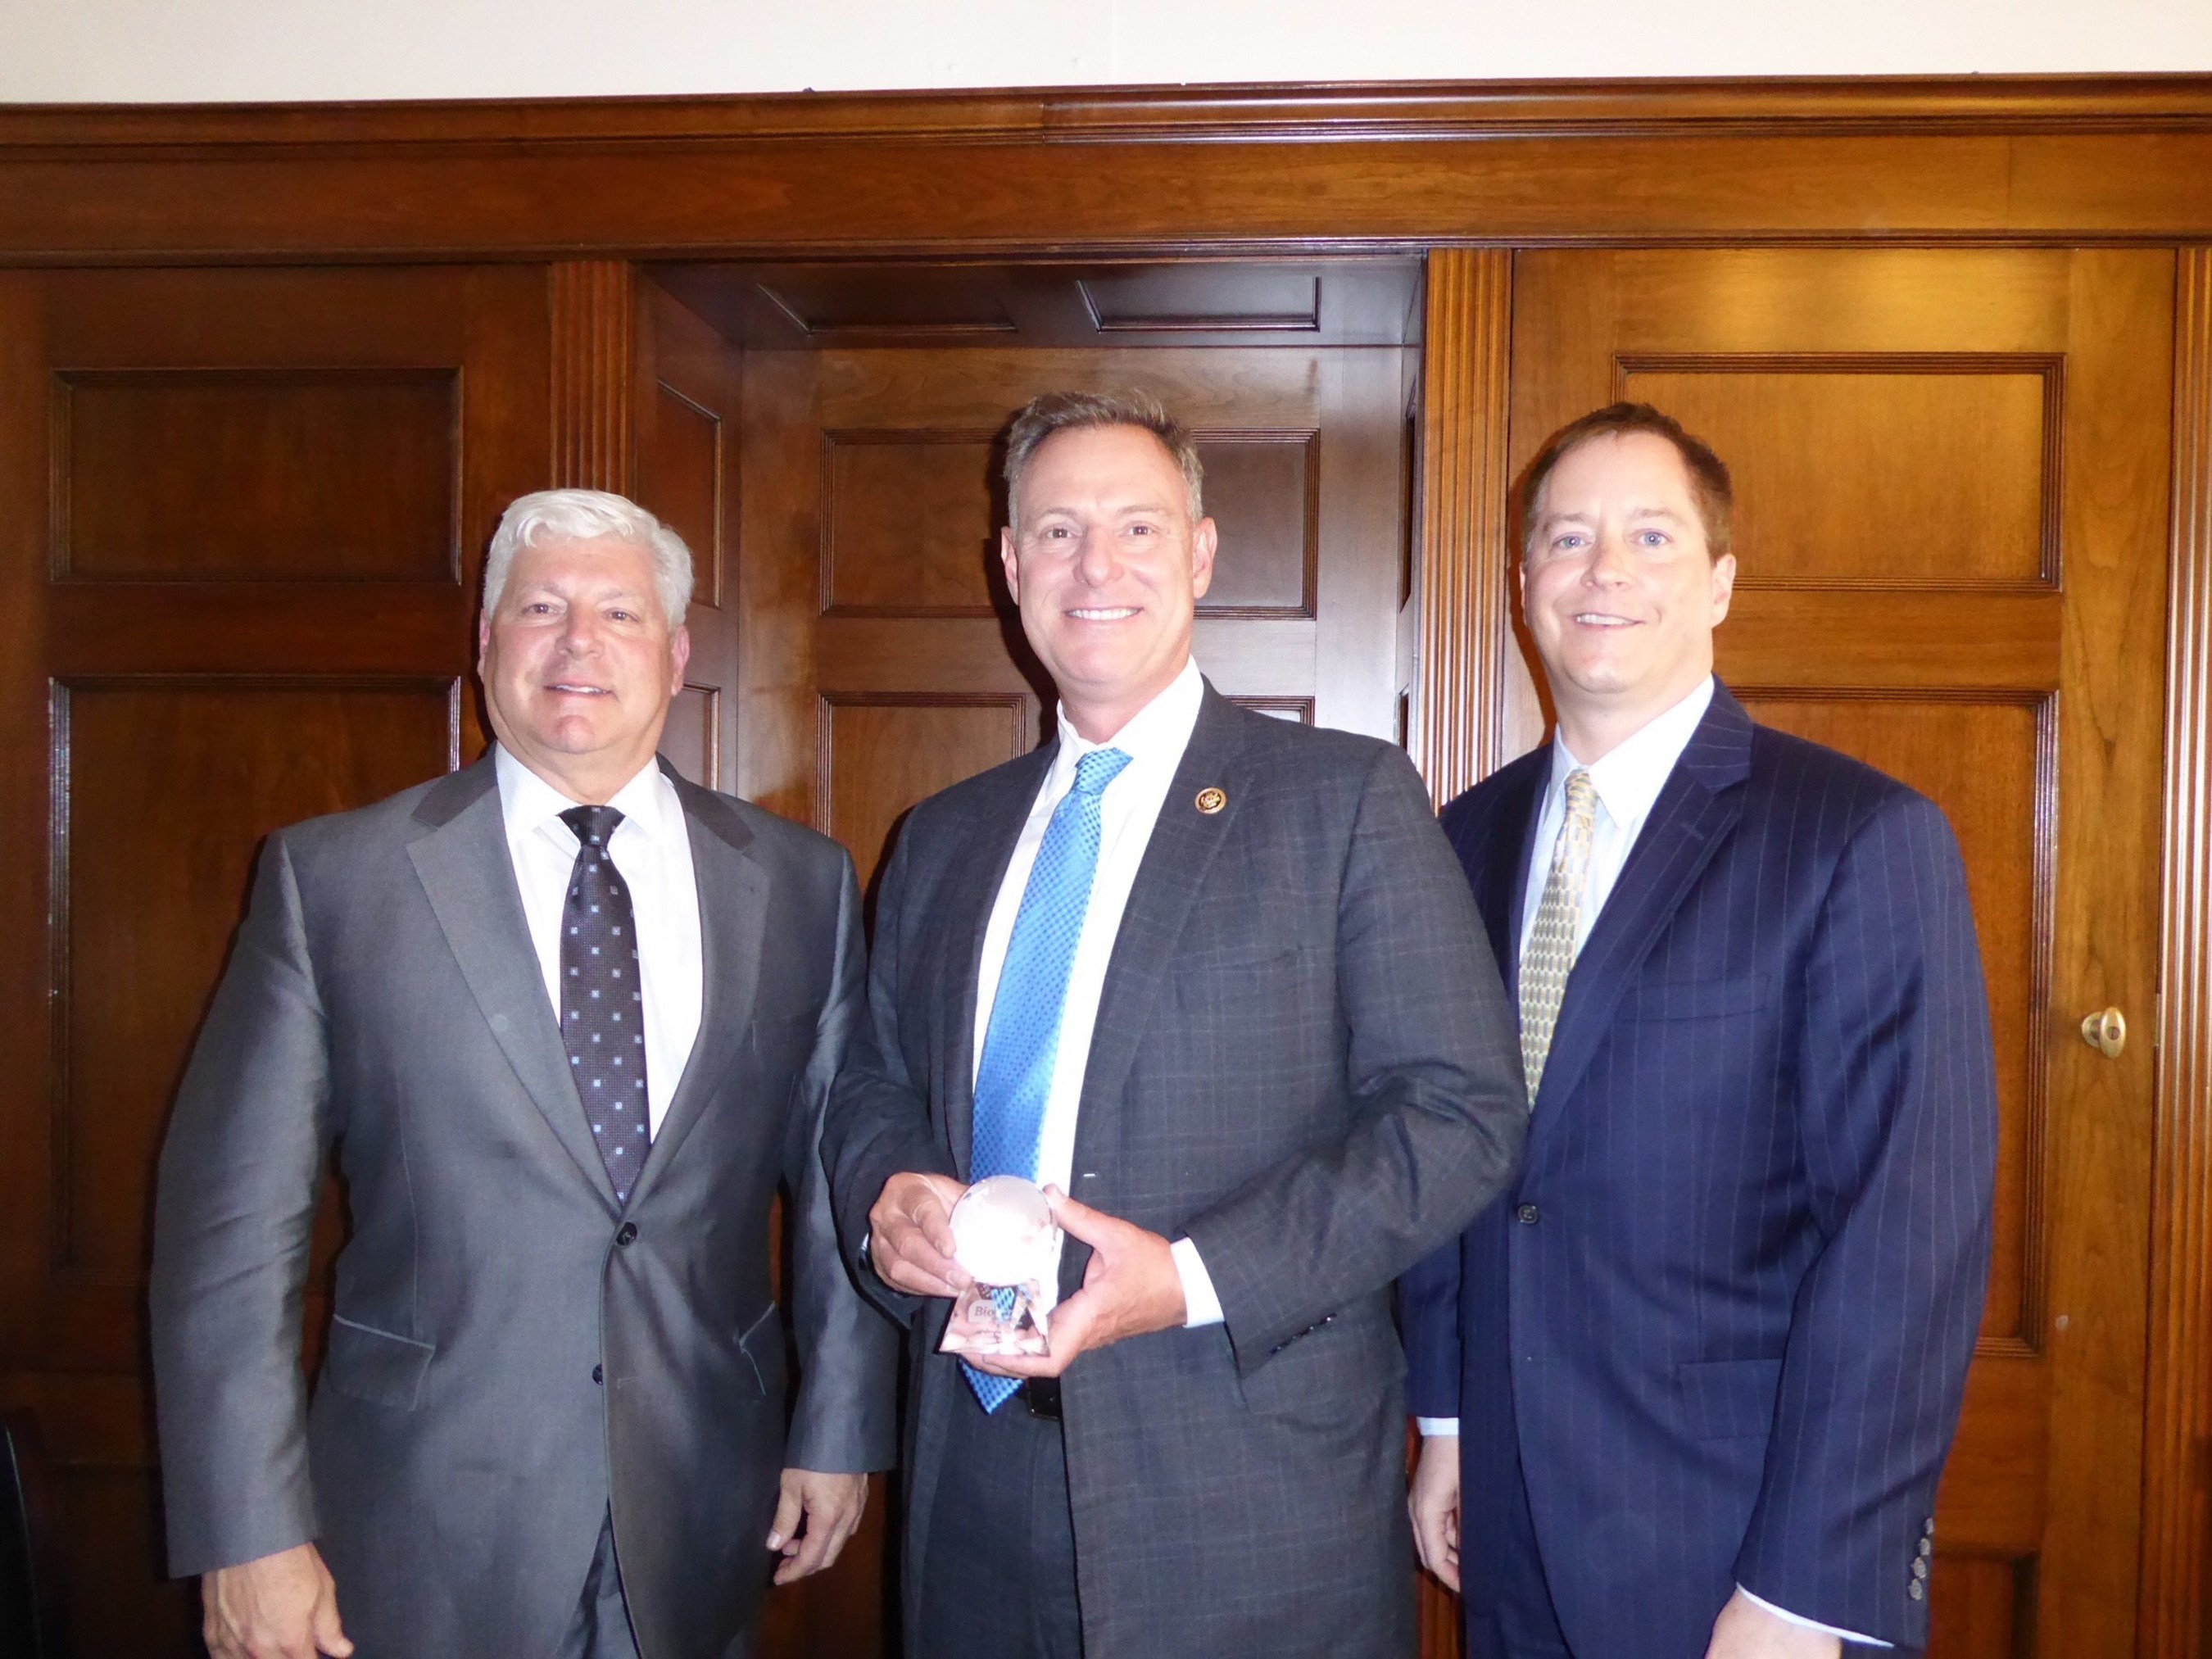 Congressman Scott Peters (center) receives the 2016 BIO Legislator of the Year Award. Joe Panetta (left), president and CEO of Biocom, and Todd Gillenwater, (right) executive vice president of CLSA, are pictured with Representative Peters.